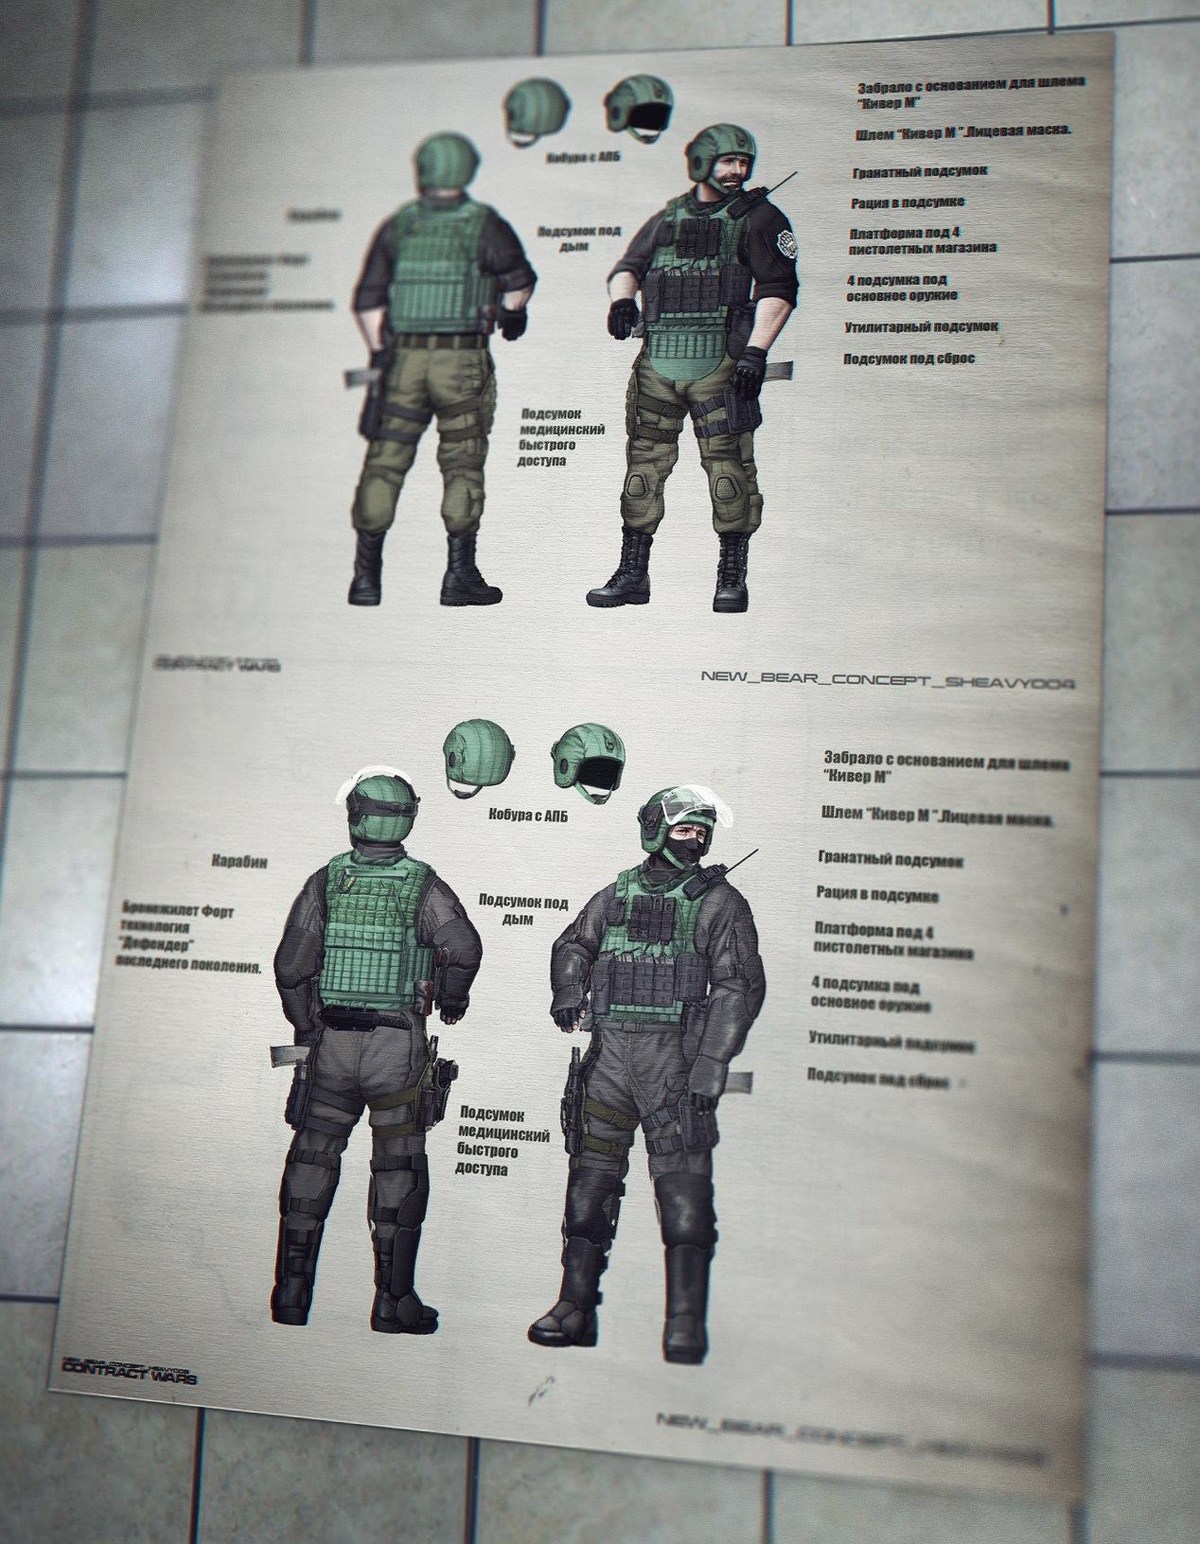 BEAR - The Official Escape from Tarkov Wiki